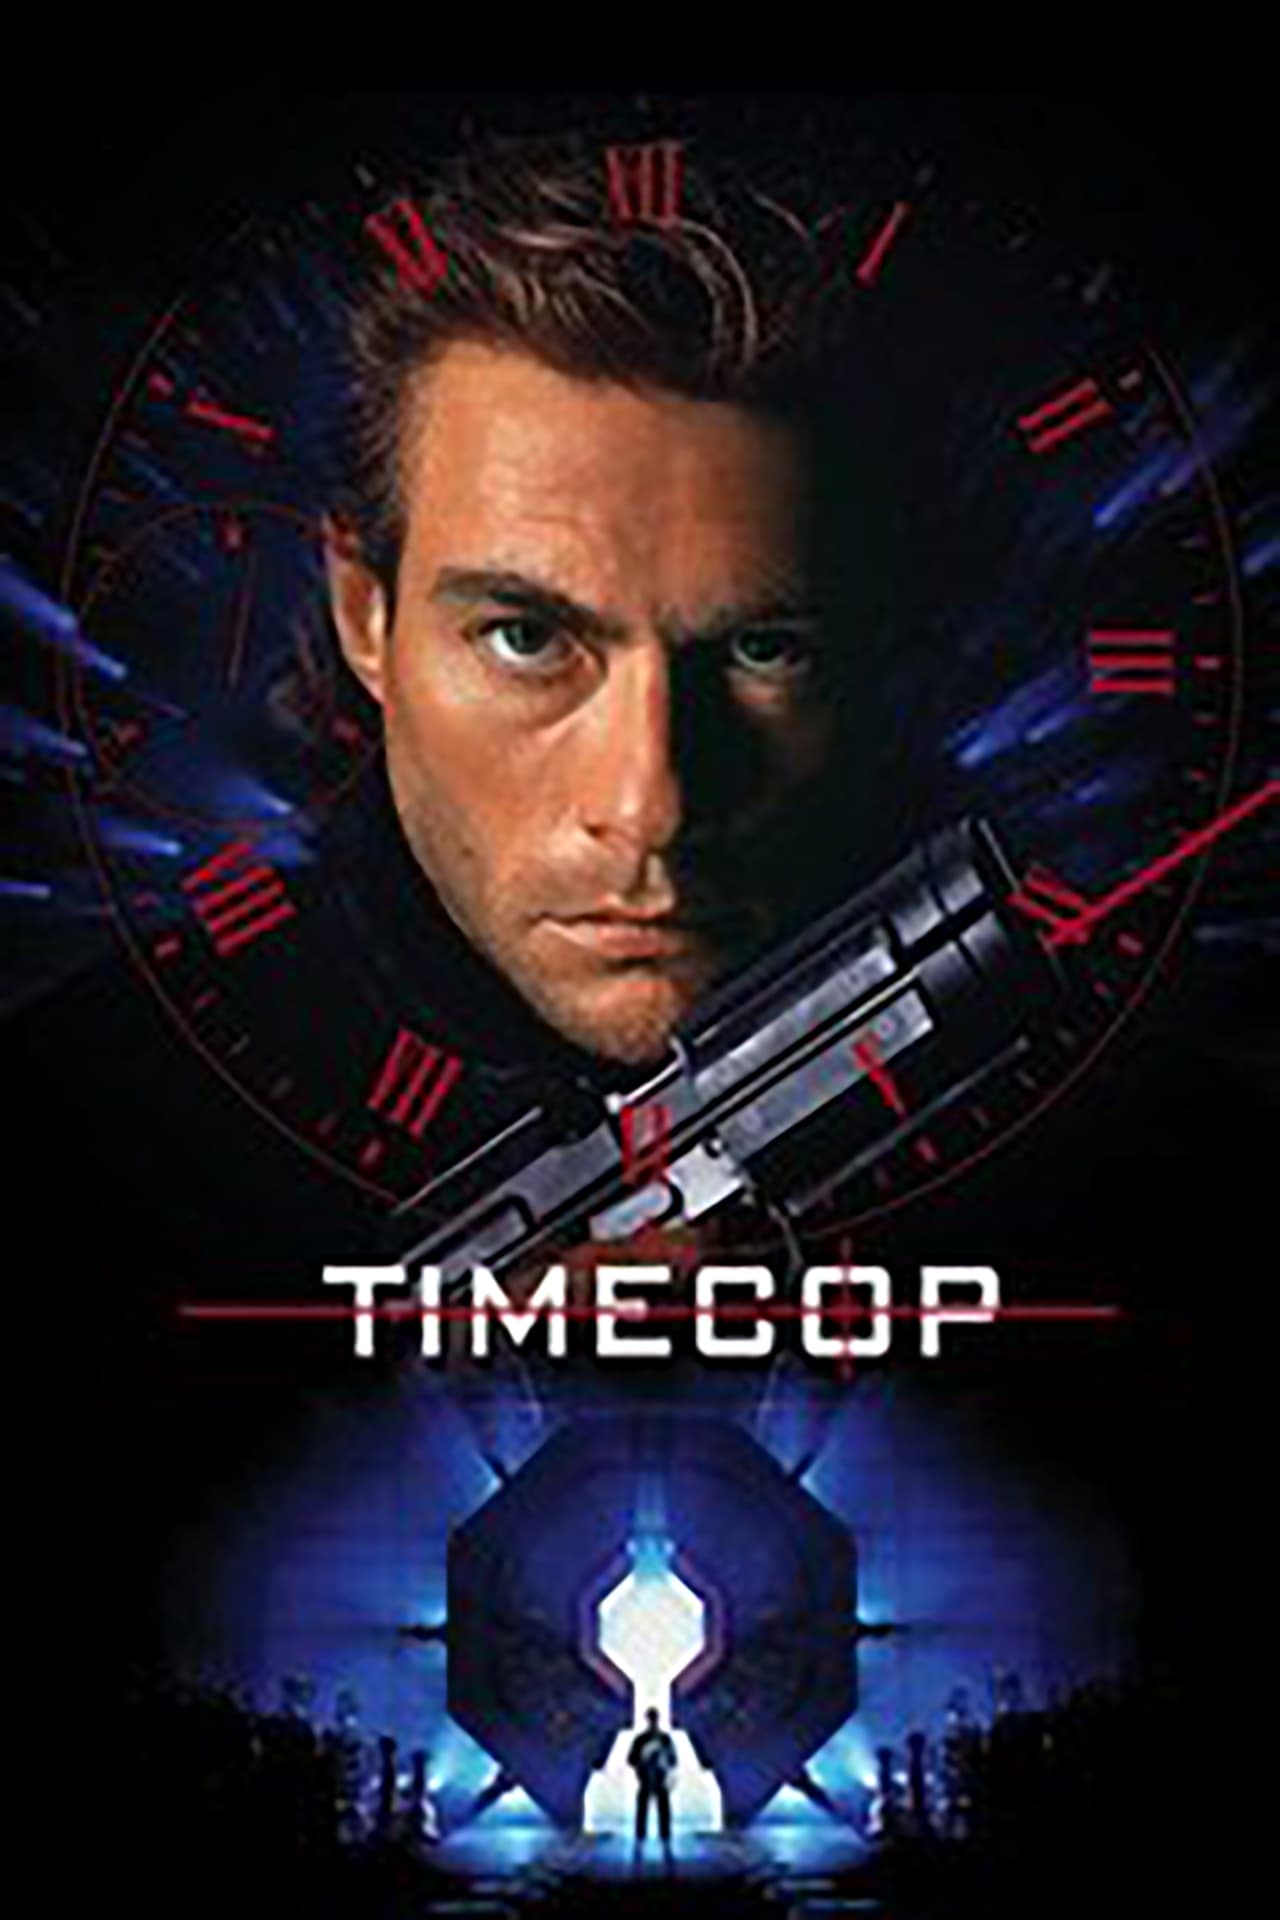 timecop hd dvd review